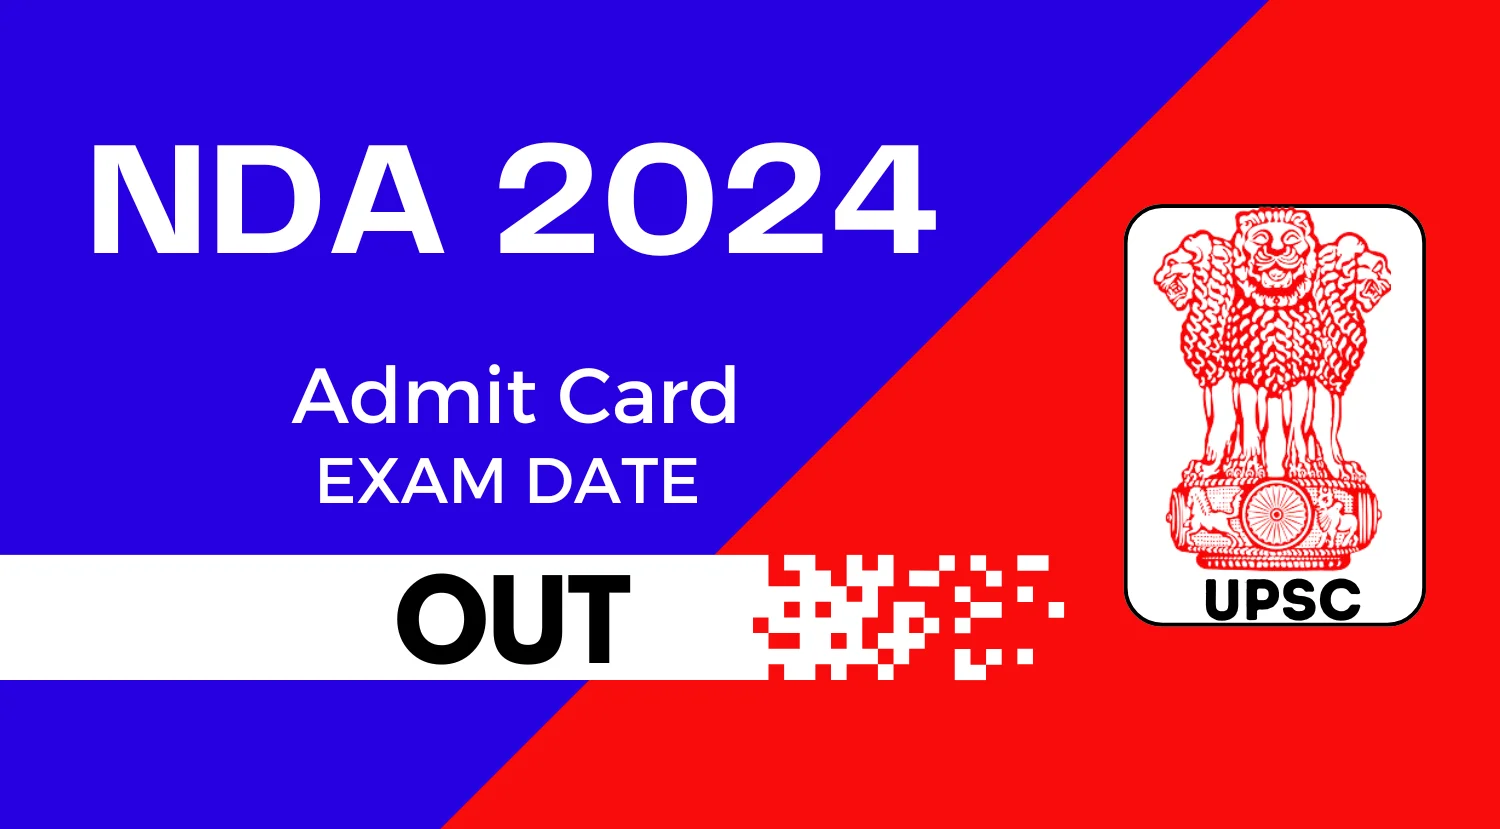 UPSC NDA Admit Card 2024 Official Notice OUT